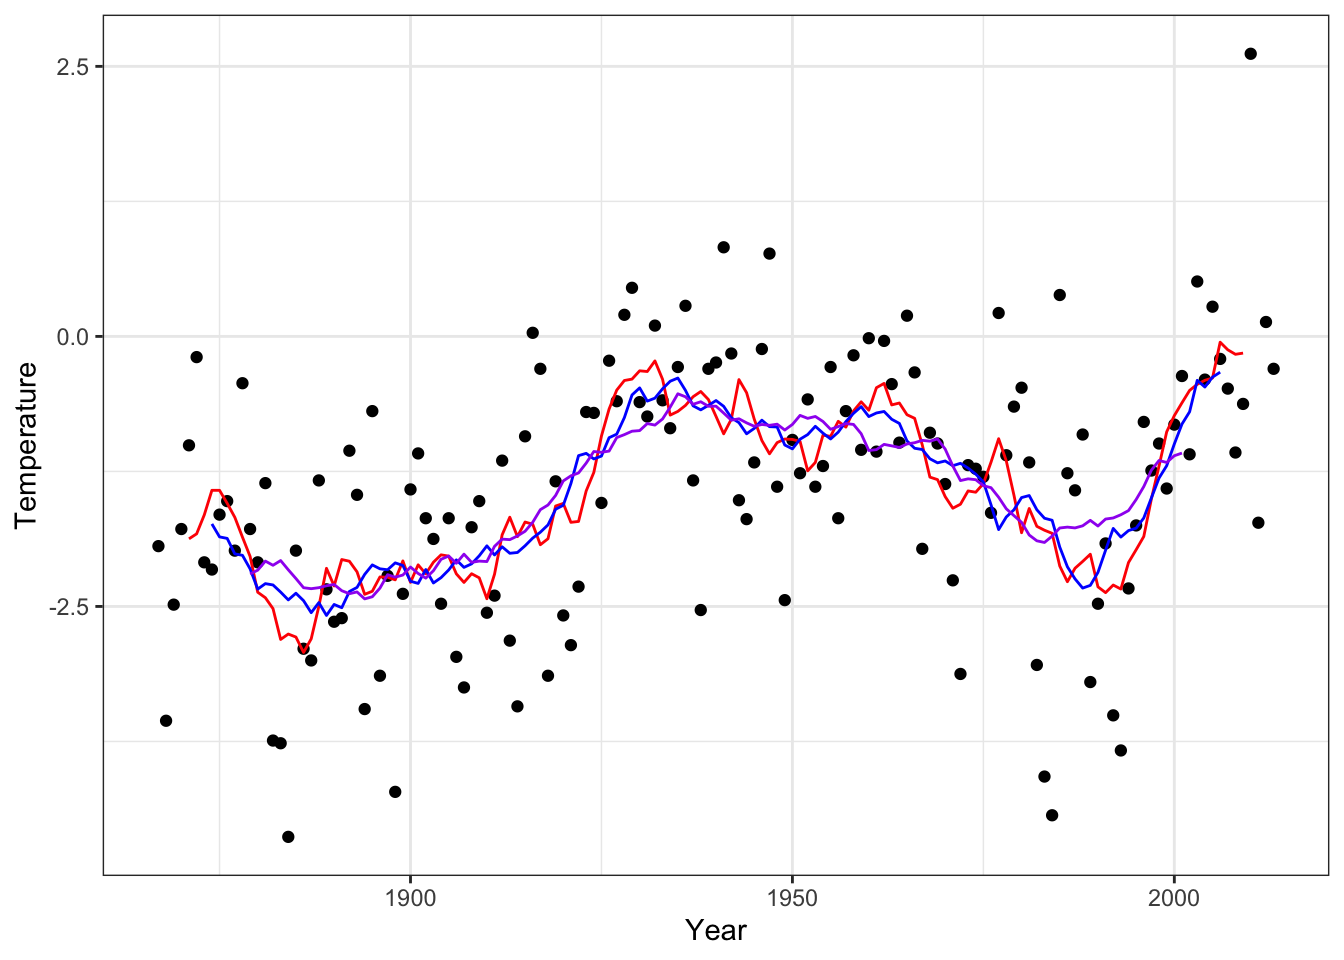 The $k$-nearest neighbor smoother with the optimal choice of $k$ based on LOOCV (blue) and with $k = 9$ (red) and $k = 25$ (purple).